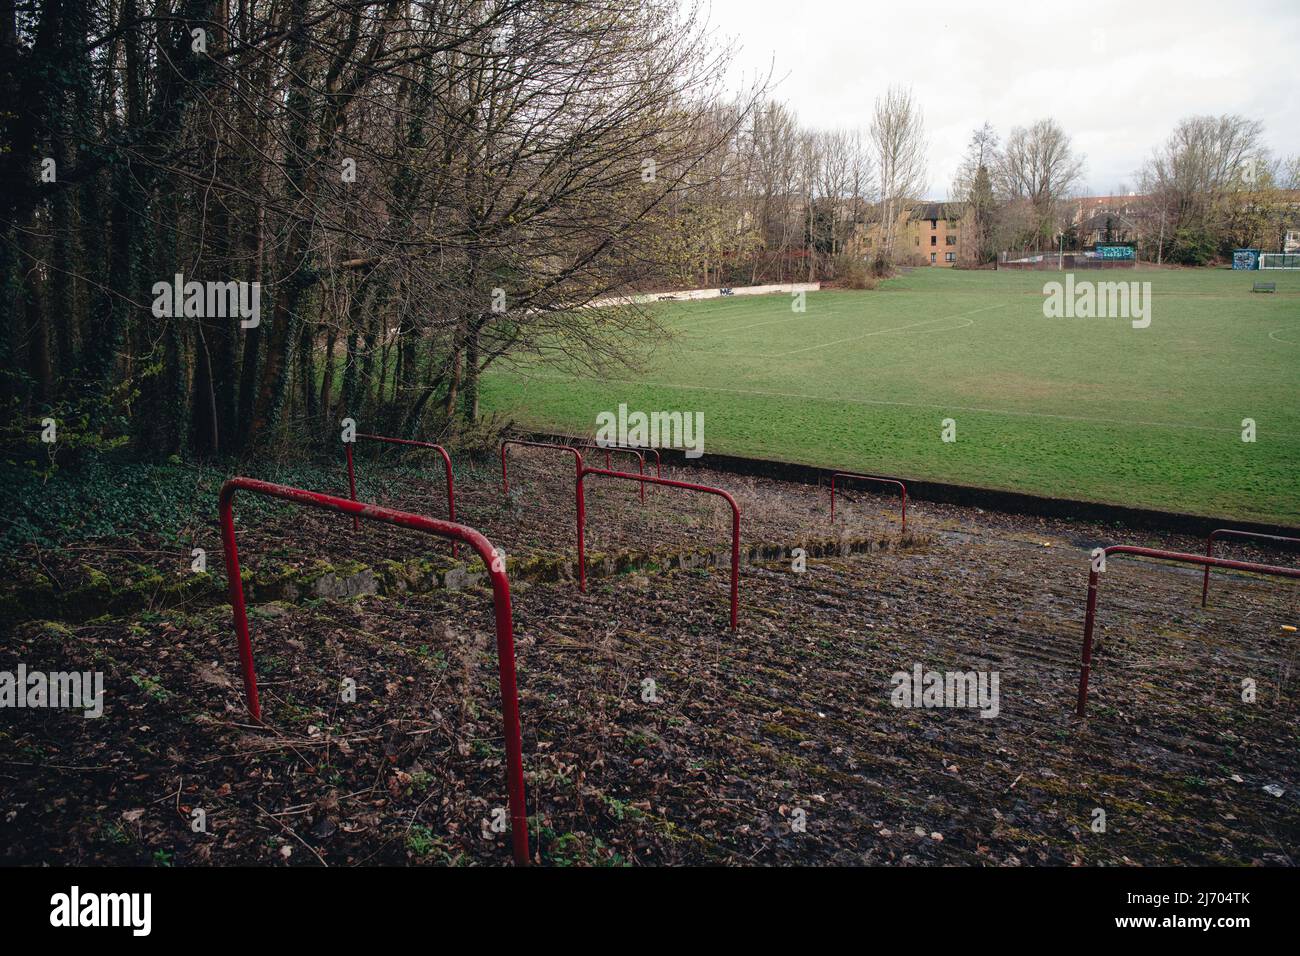 Cathkin Park is a football ground in the Crosshill area of Glasgow, Scotland. It was the home ground of Third Lanark from their foundation in 1872 unt Stock Photo